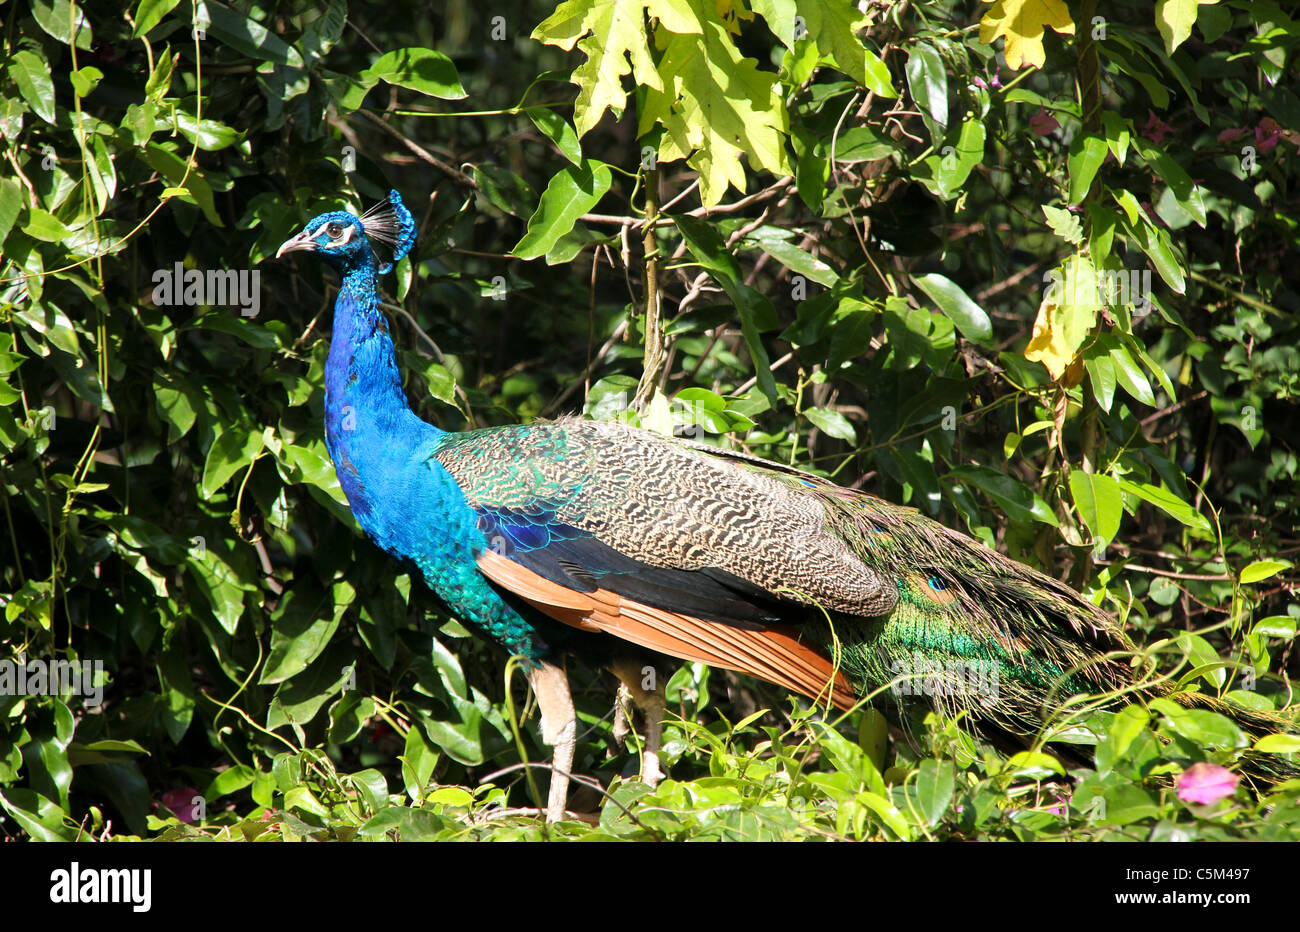 Wild peacock in forest in India Stock Photo